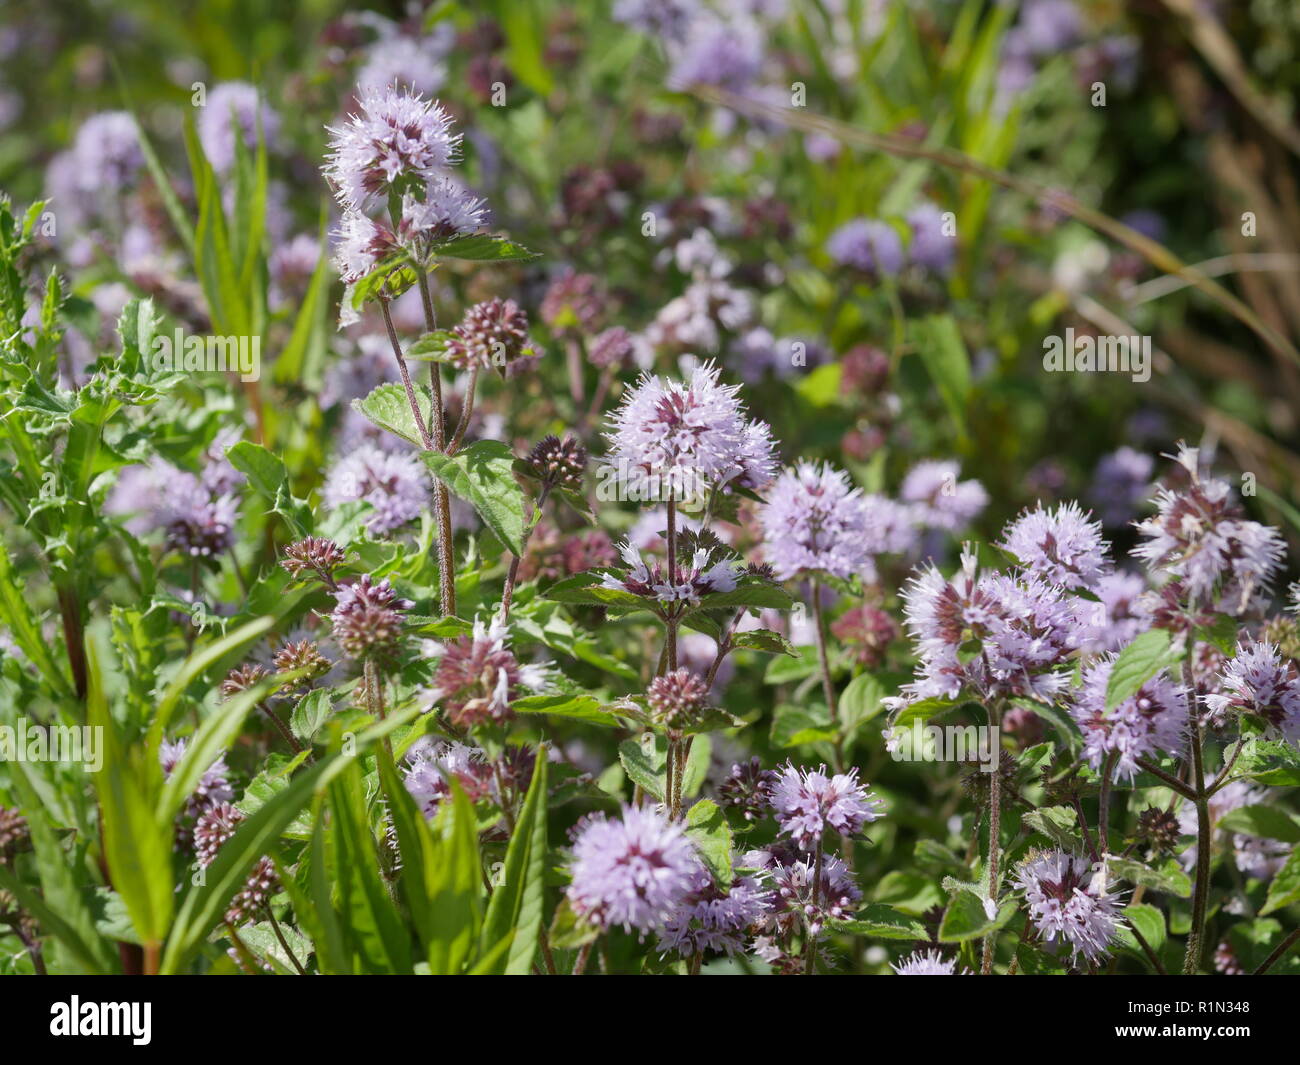 mint flowers in the meadow lamiaceae lindl Stock Photo